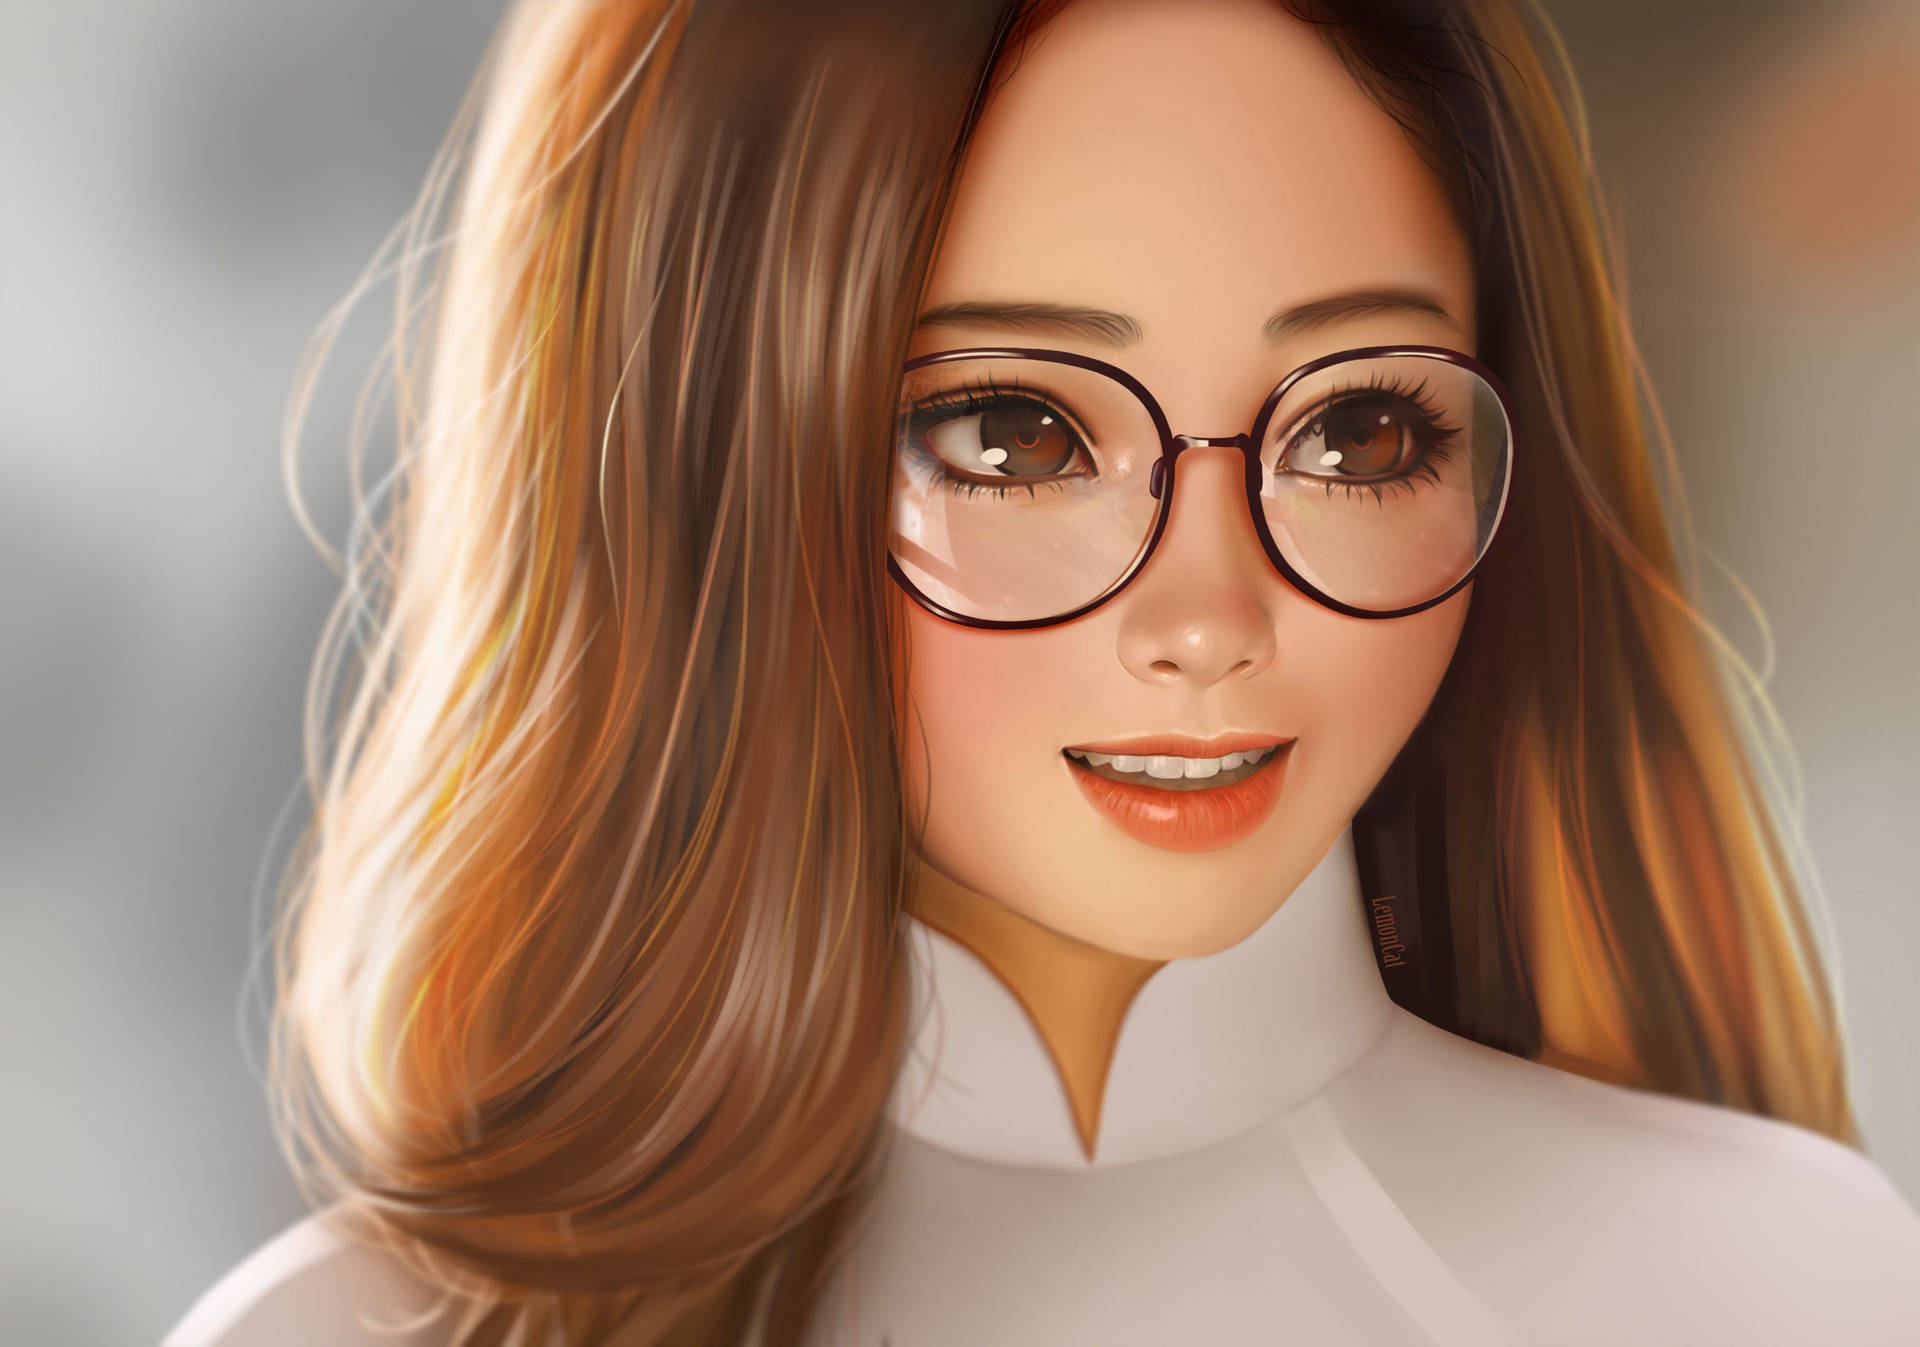 Cute Girl With Glasses Artwork Background